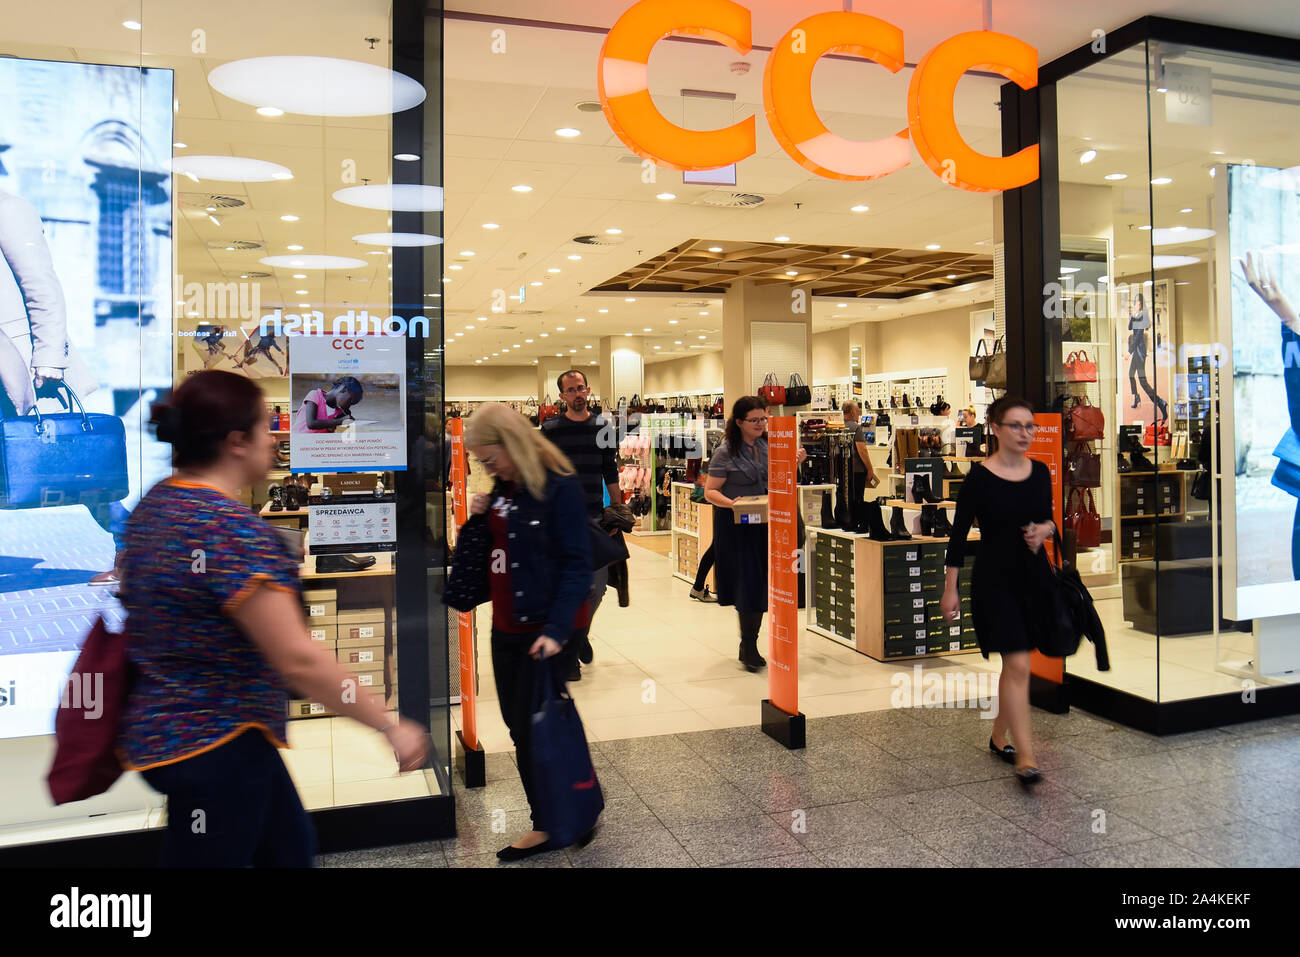 Polish clothing store chain CCC in Krakow. Stock Photo